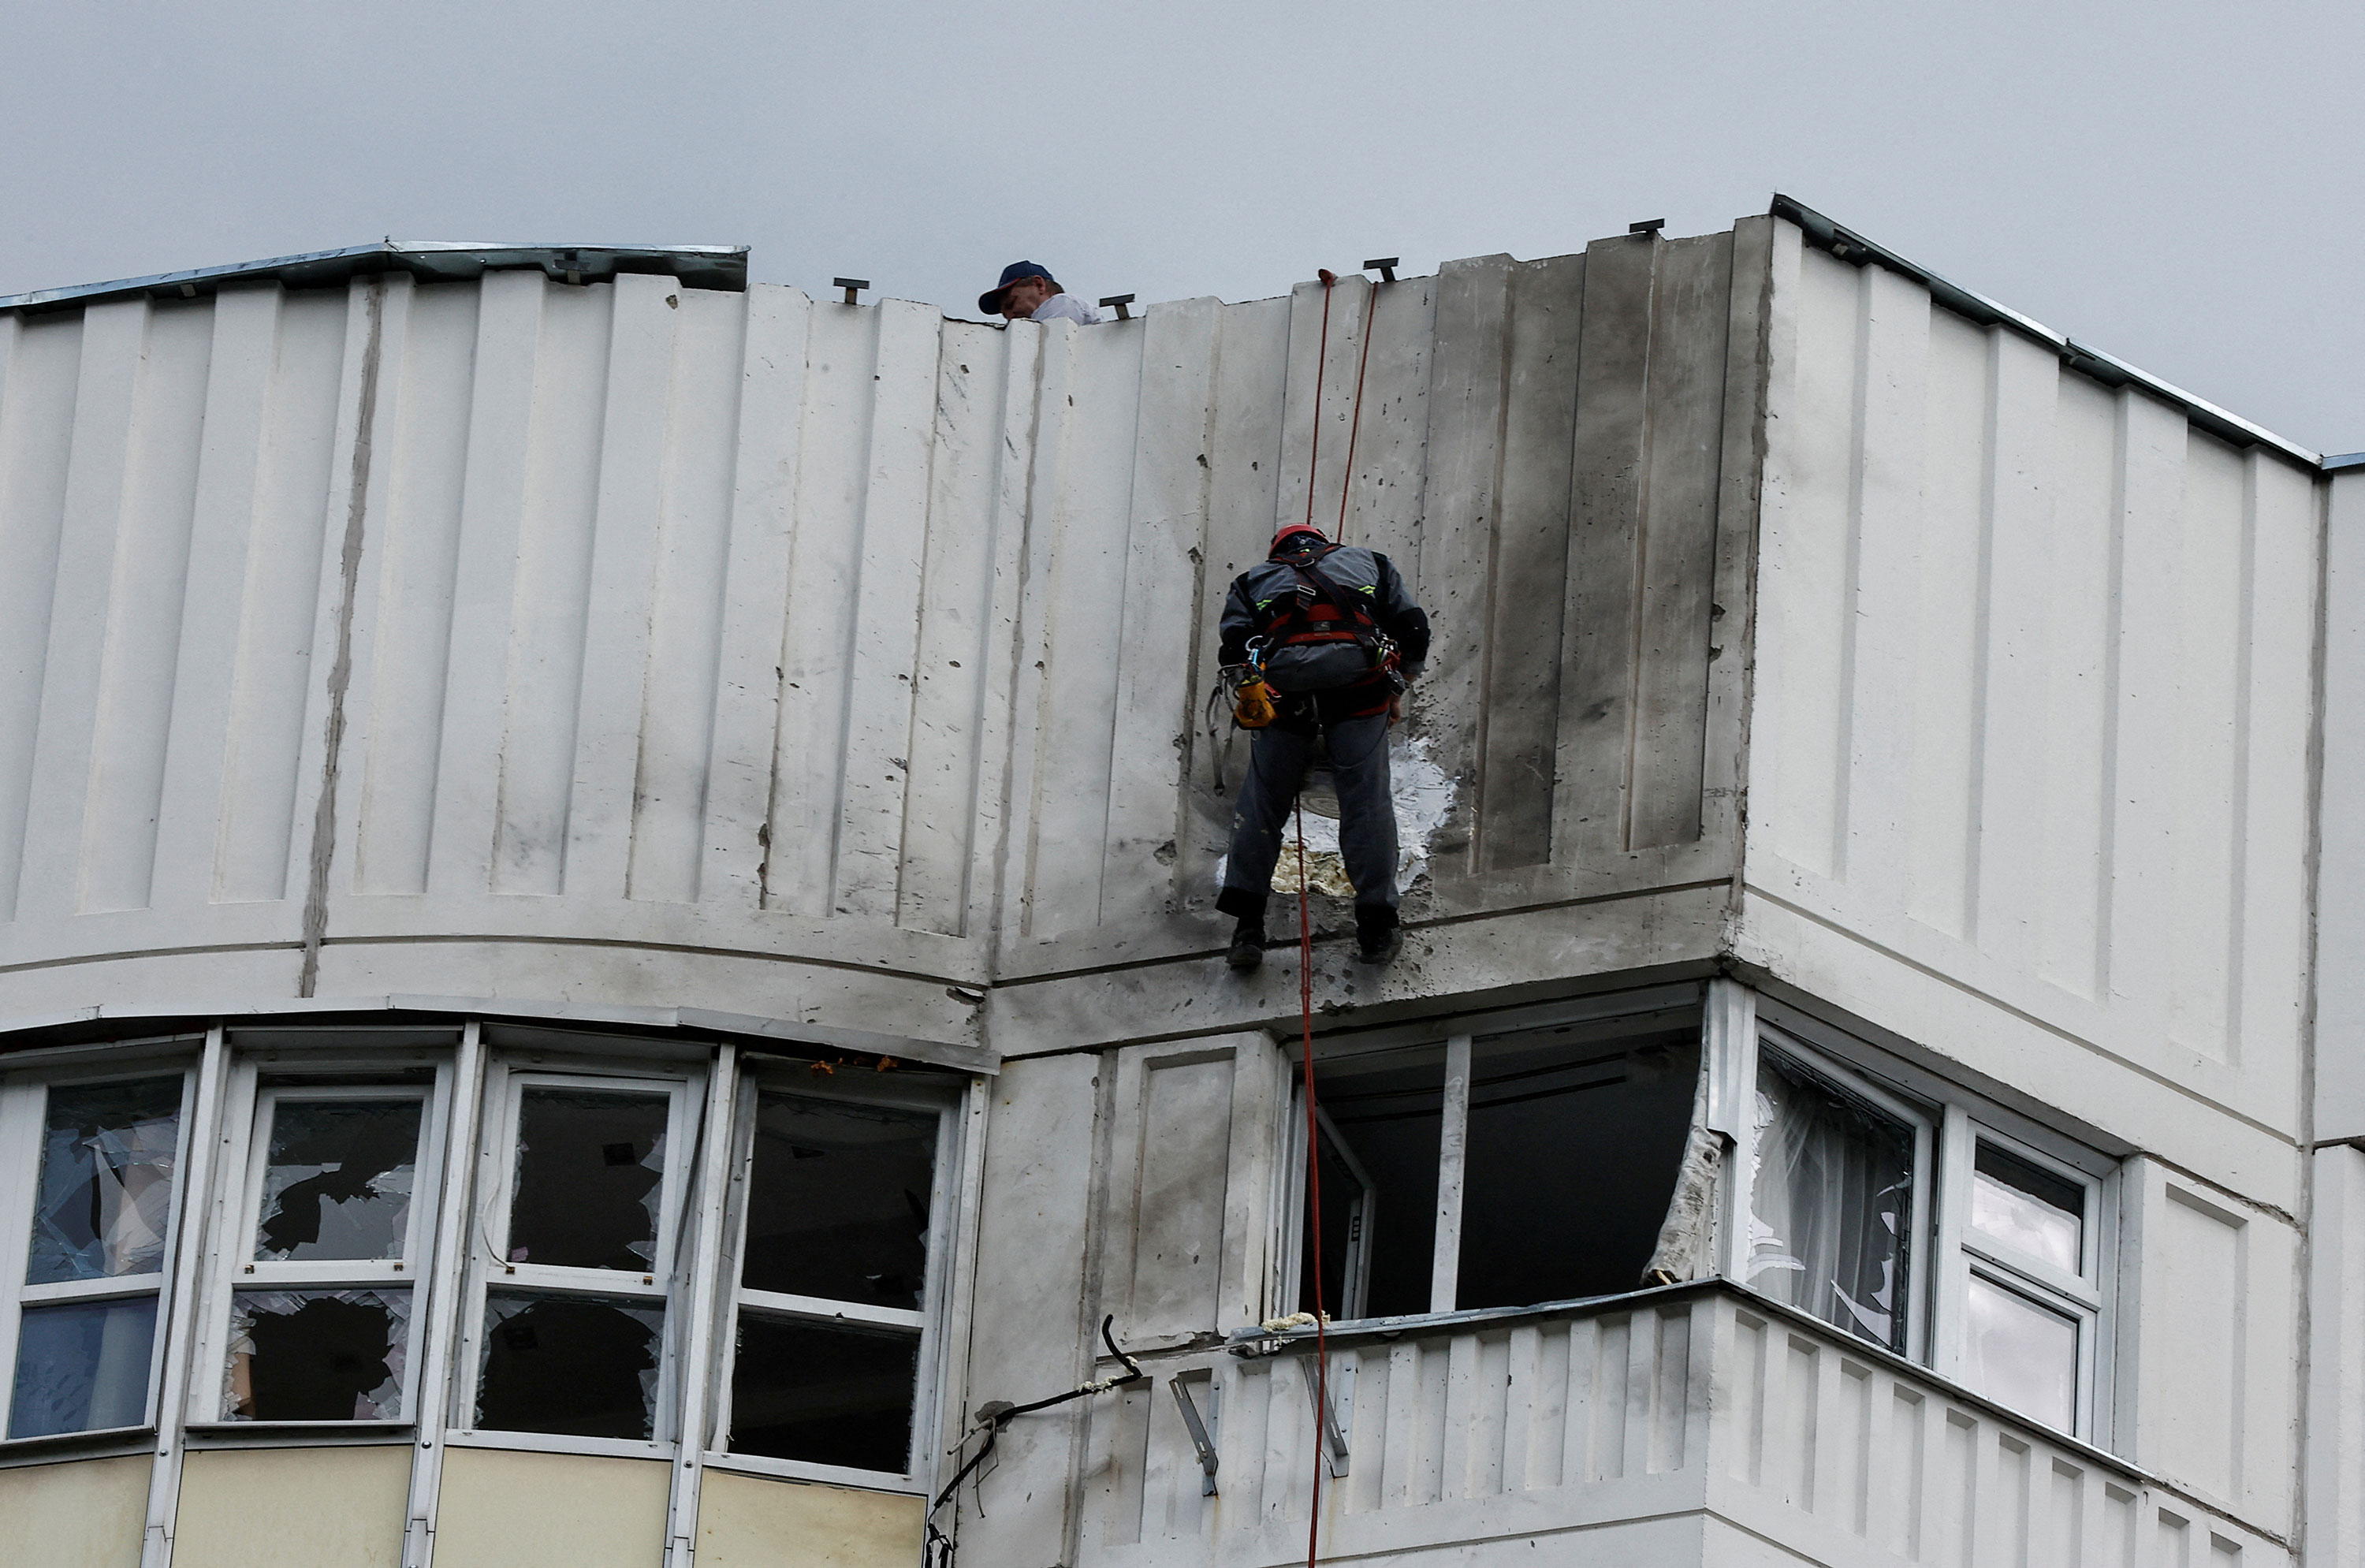 Workers repair damage on the roof of an apartment building after a drone attack in Moscow on Tuesday.